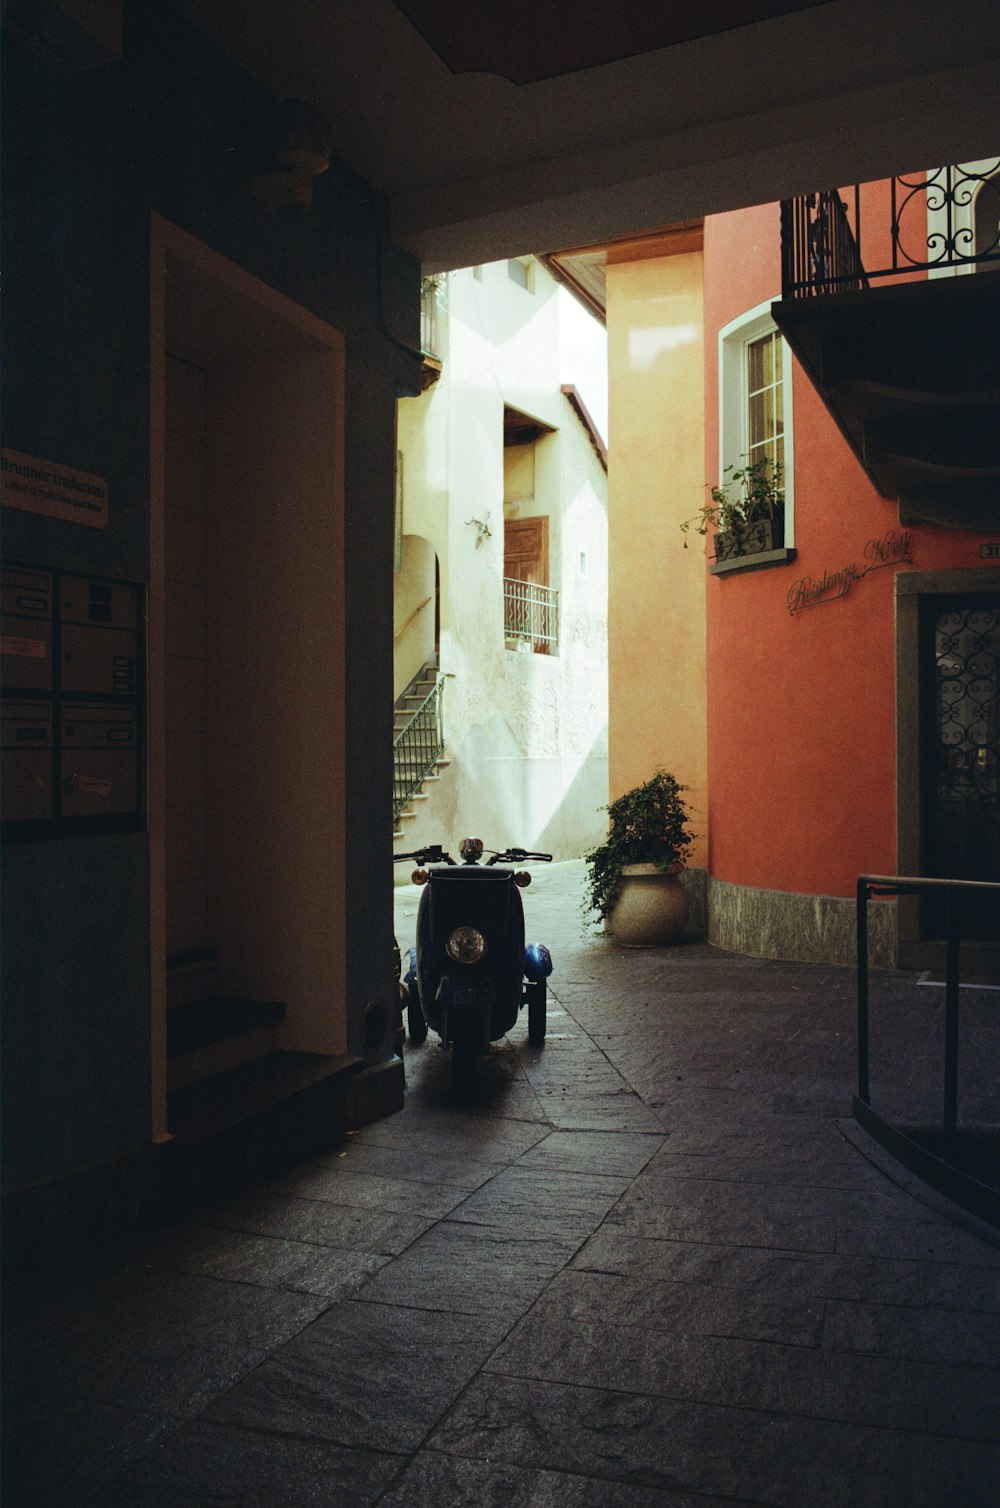 a motor scooter parked in a narrow alley way